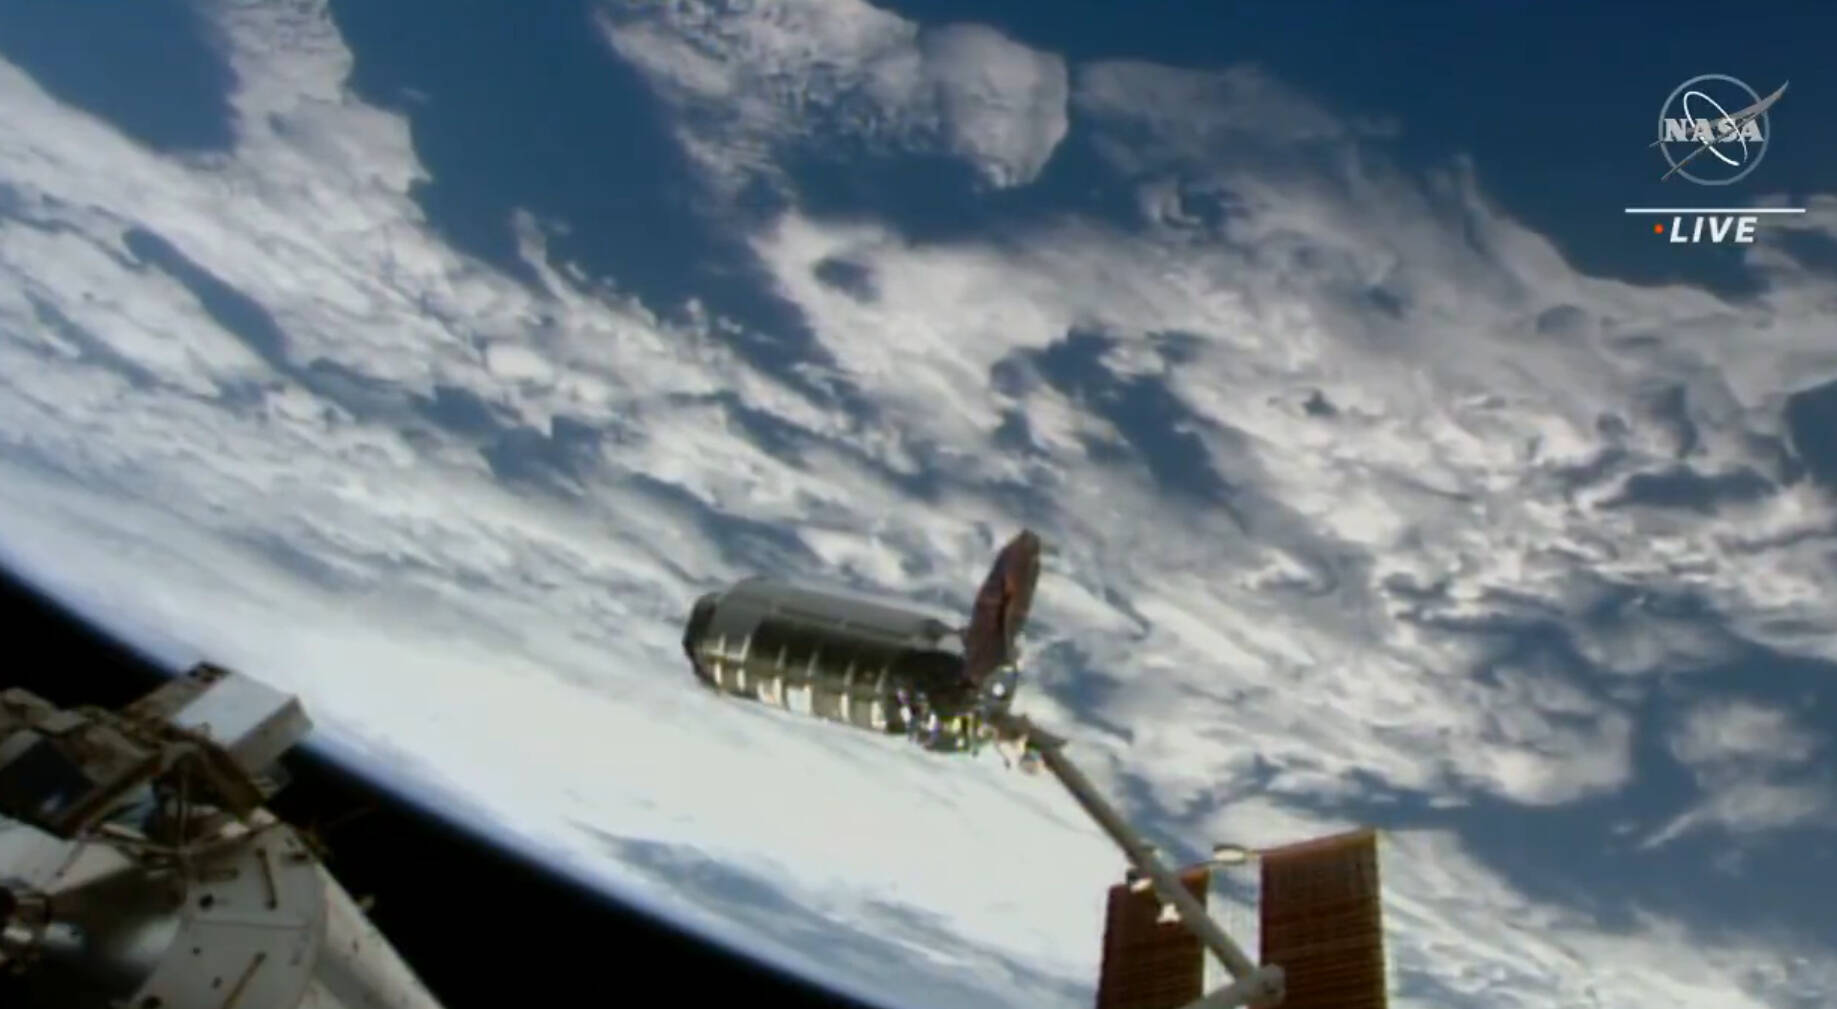 Cygnus cargo ship makes it to ISS with blanketed solar panel